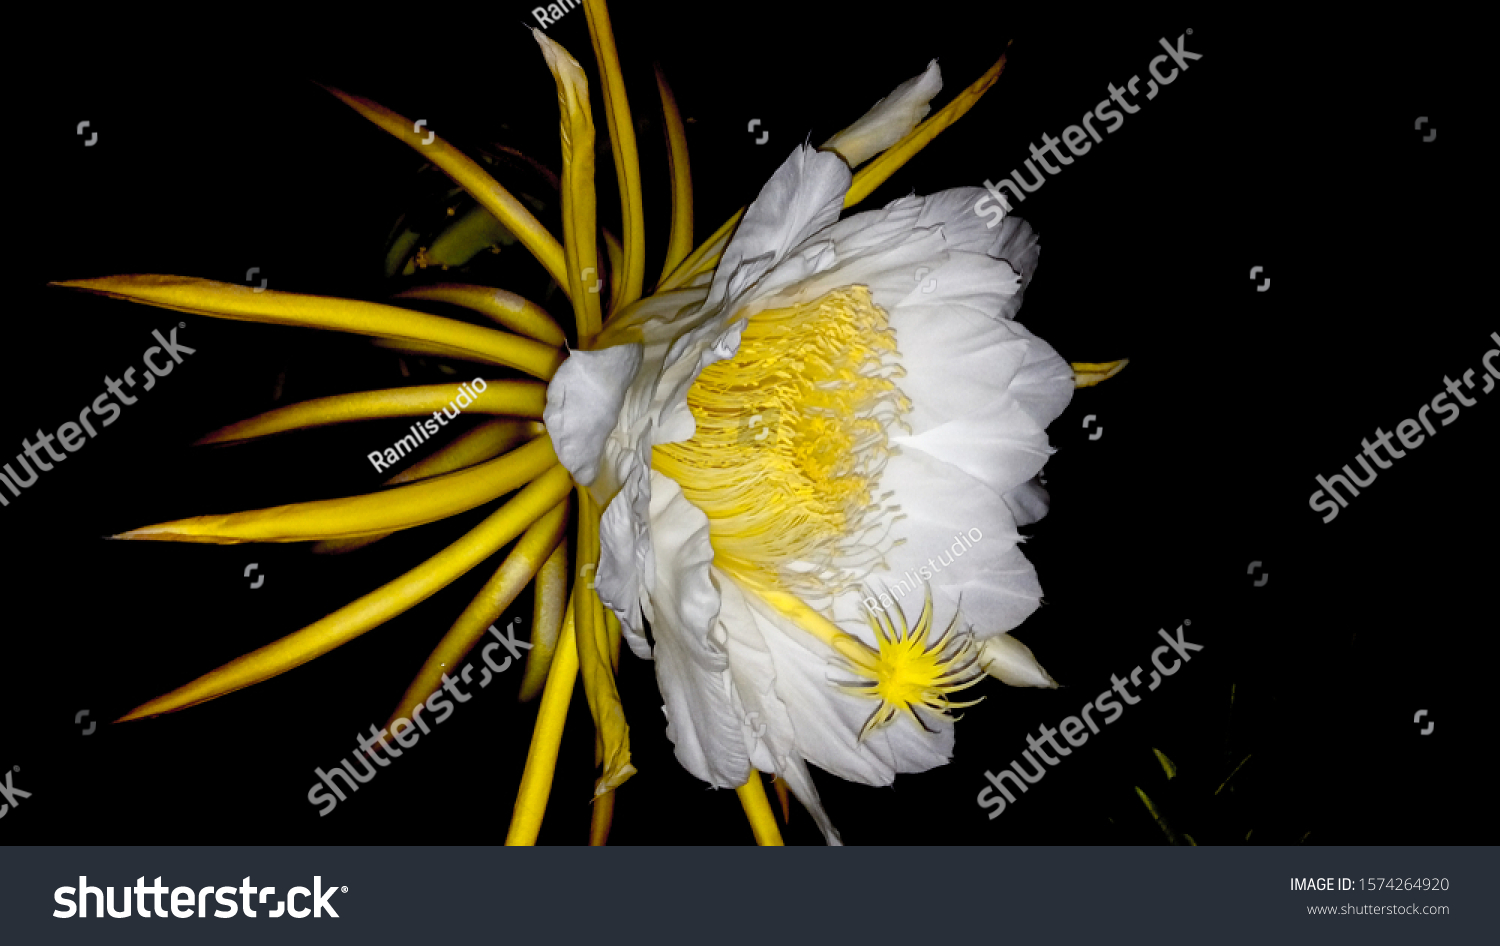 Dragon fruit blooms at night, the flowers last a few hours into the morning, and they tend to bloom in unison #1574264920